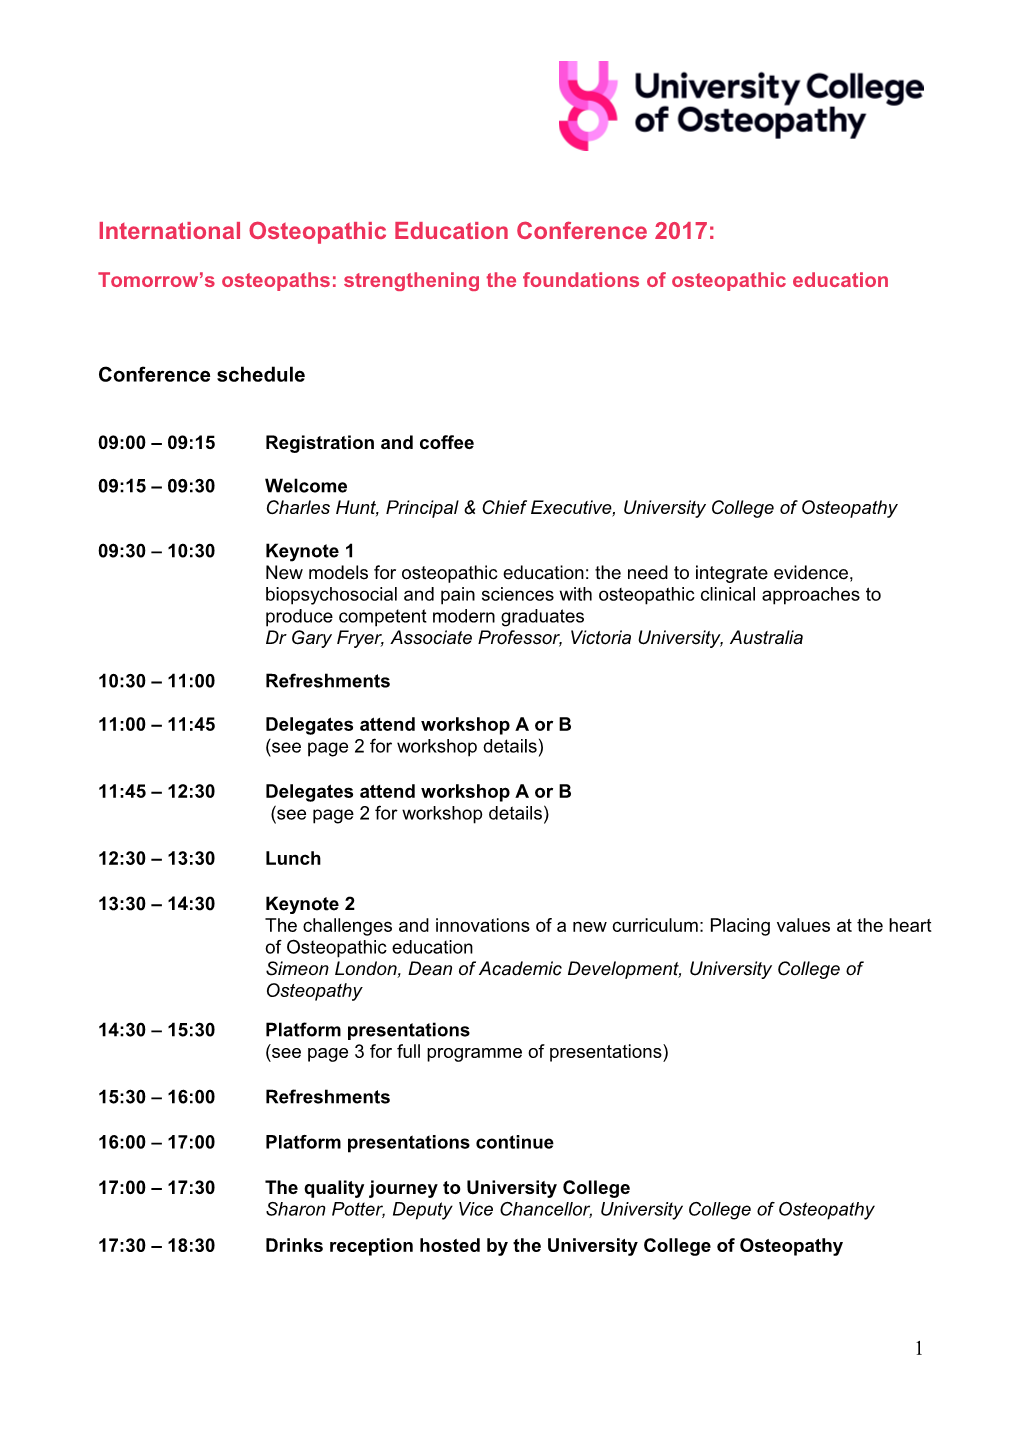 Tomorrow S Osteopaths: Strengthening the Foundations of Osteopathic Education